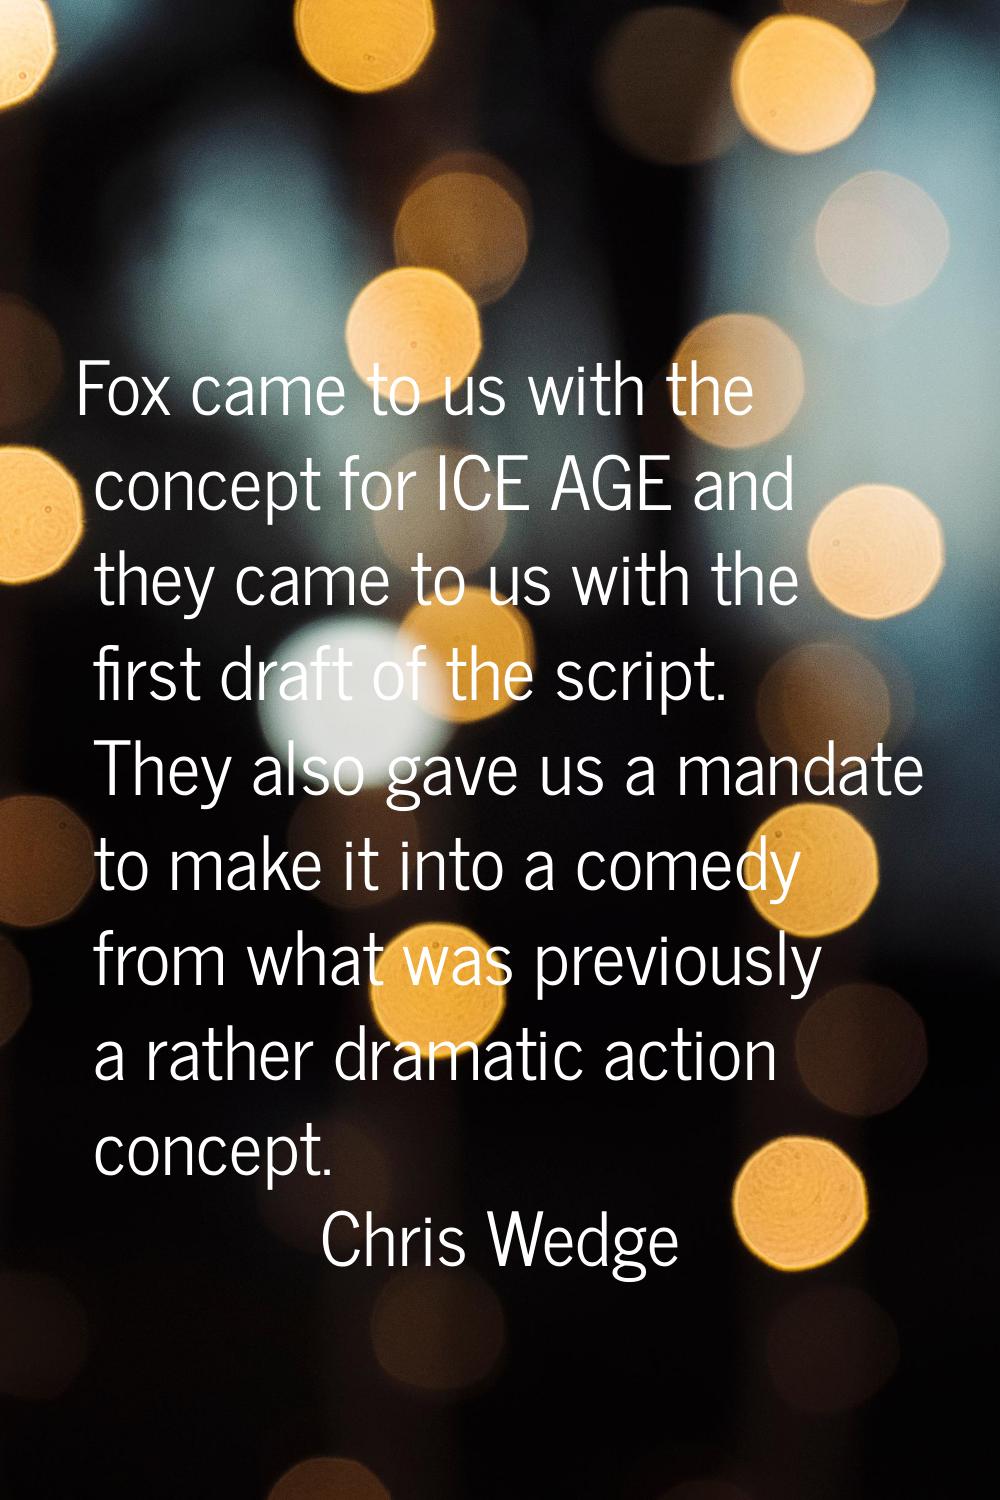 Fox came to us with the concept for ICE AGE and they came to us with the first draft of the script.